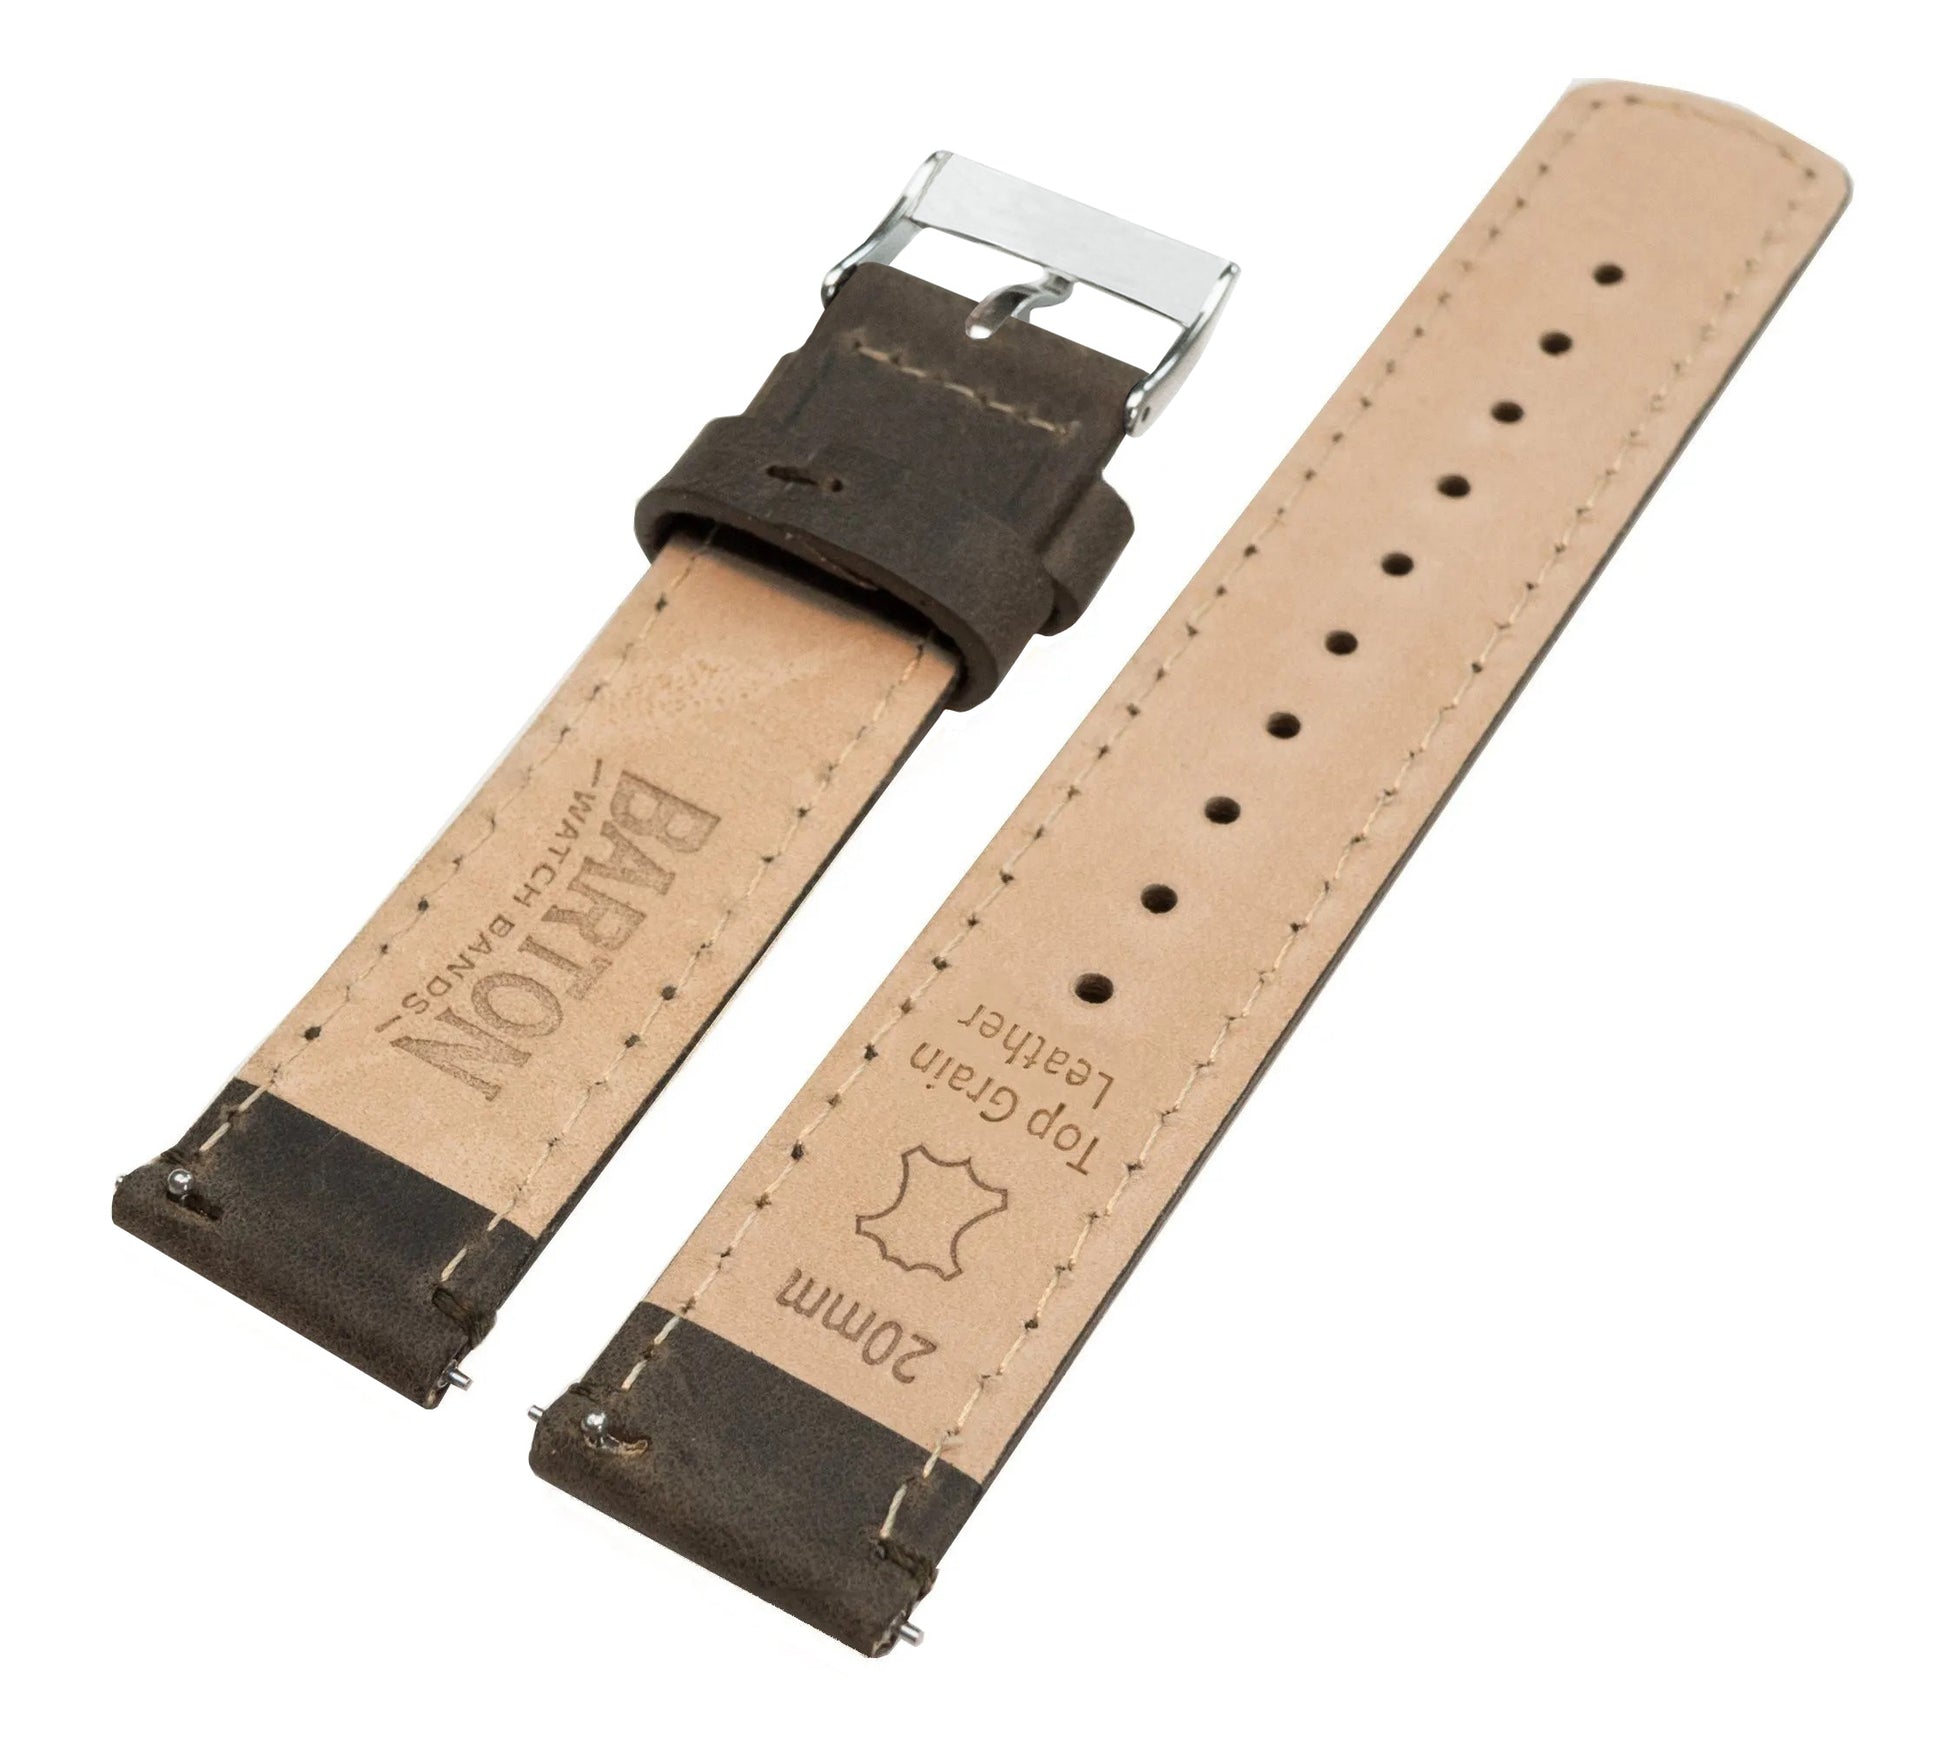 Fossil Sport | Espresso Brown Leather & Stitching - Barton Watch Bands